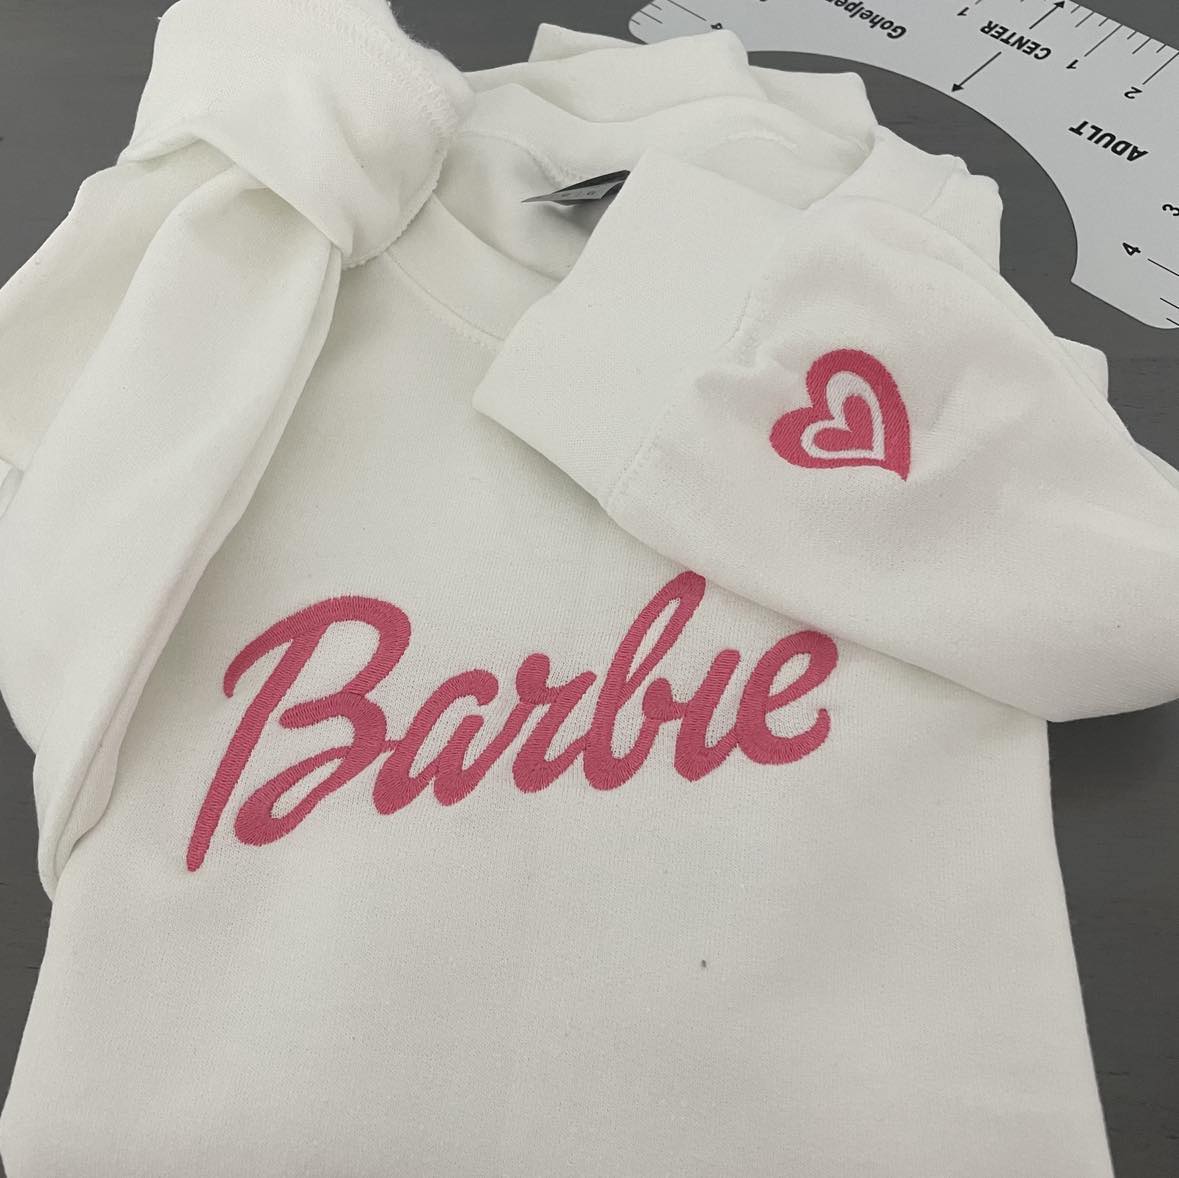 Barbie embroidered sweatshirt with a heart embroidered on the cuff